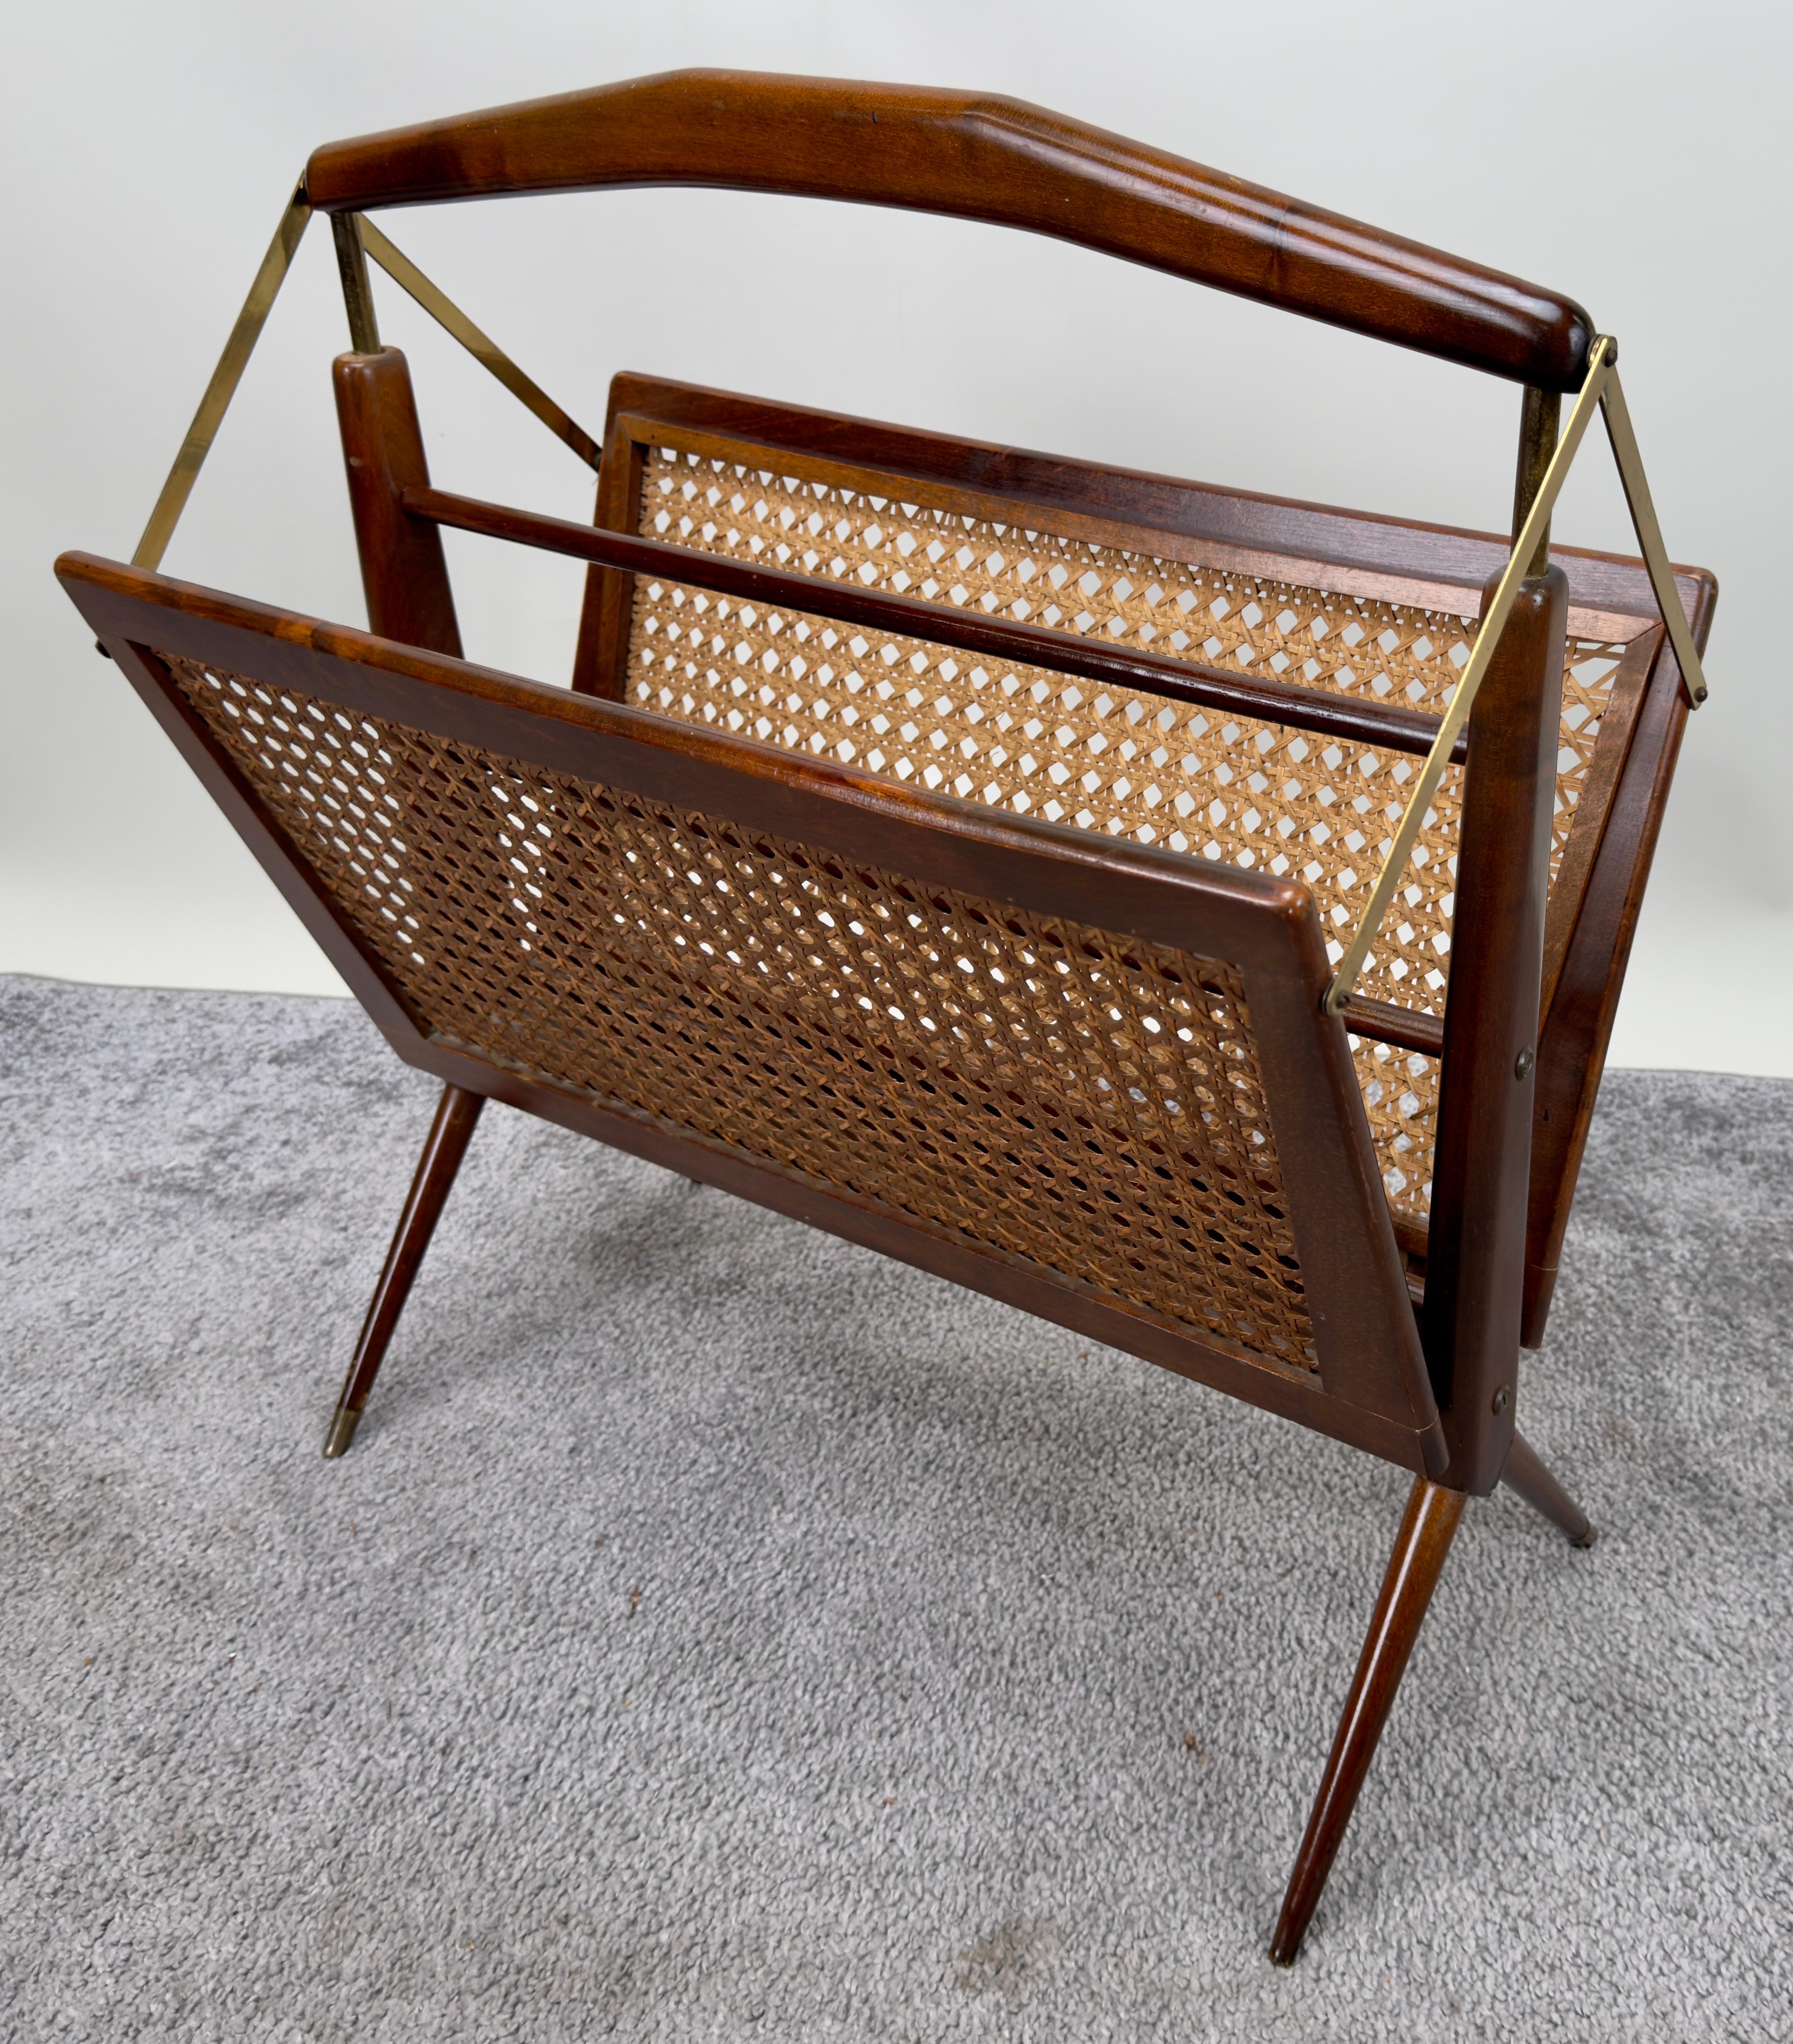  A folding magazine rack crafted by tCesare Lacca ( Italian - Born 1929- 1978 ). This exquisite piece showcases elegant cane sides gracefully accentuated by gleaming brass details. With its seamless blend of style and practicality, this magazine